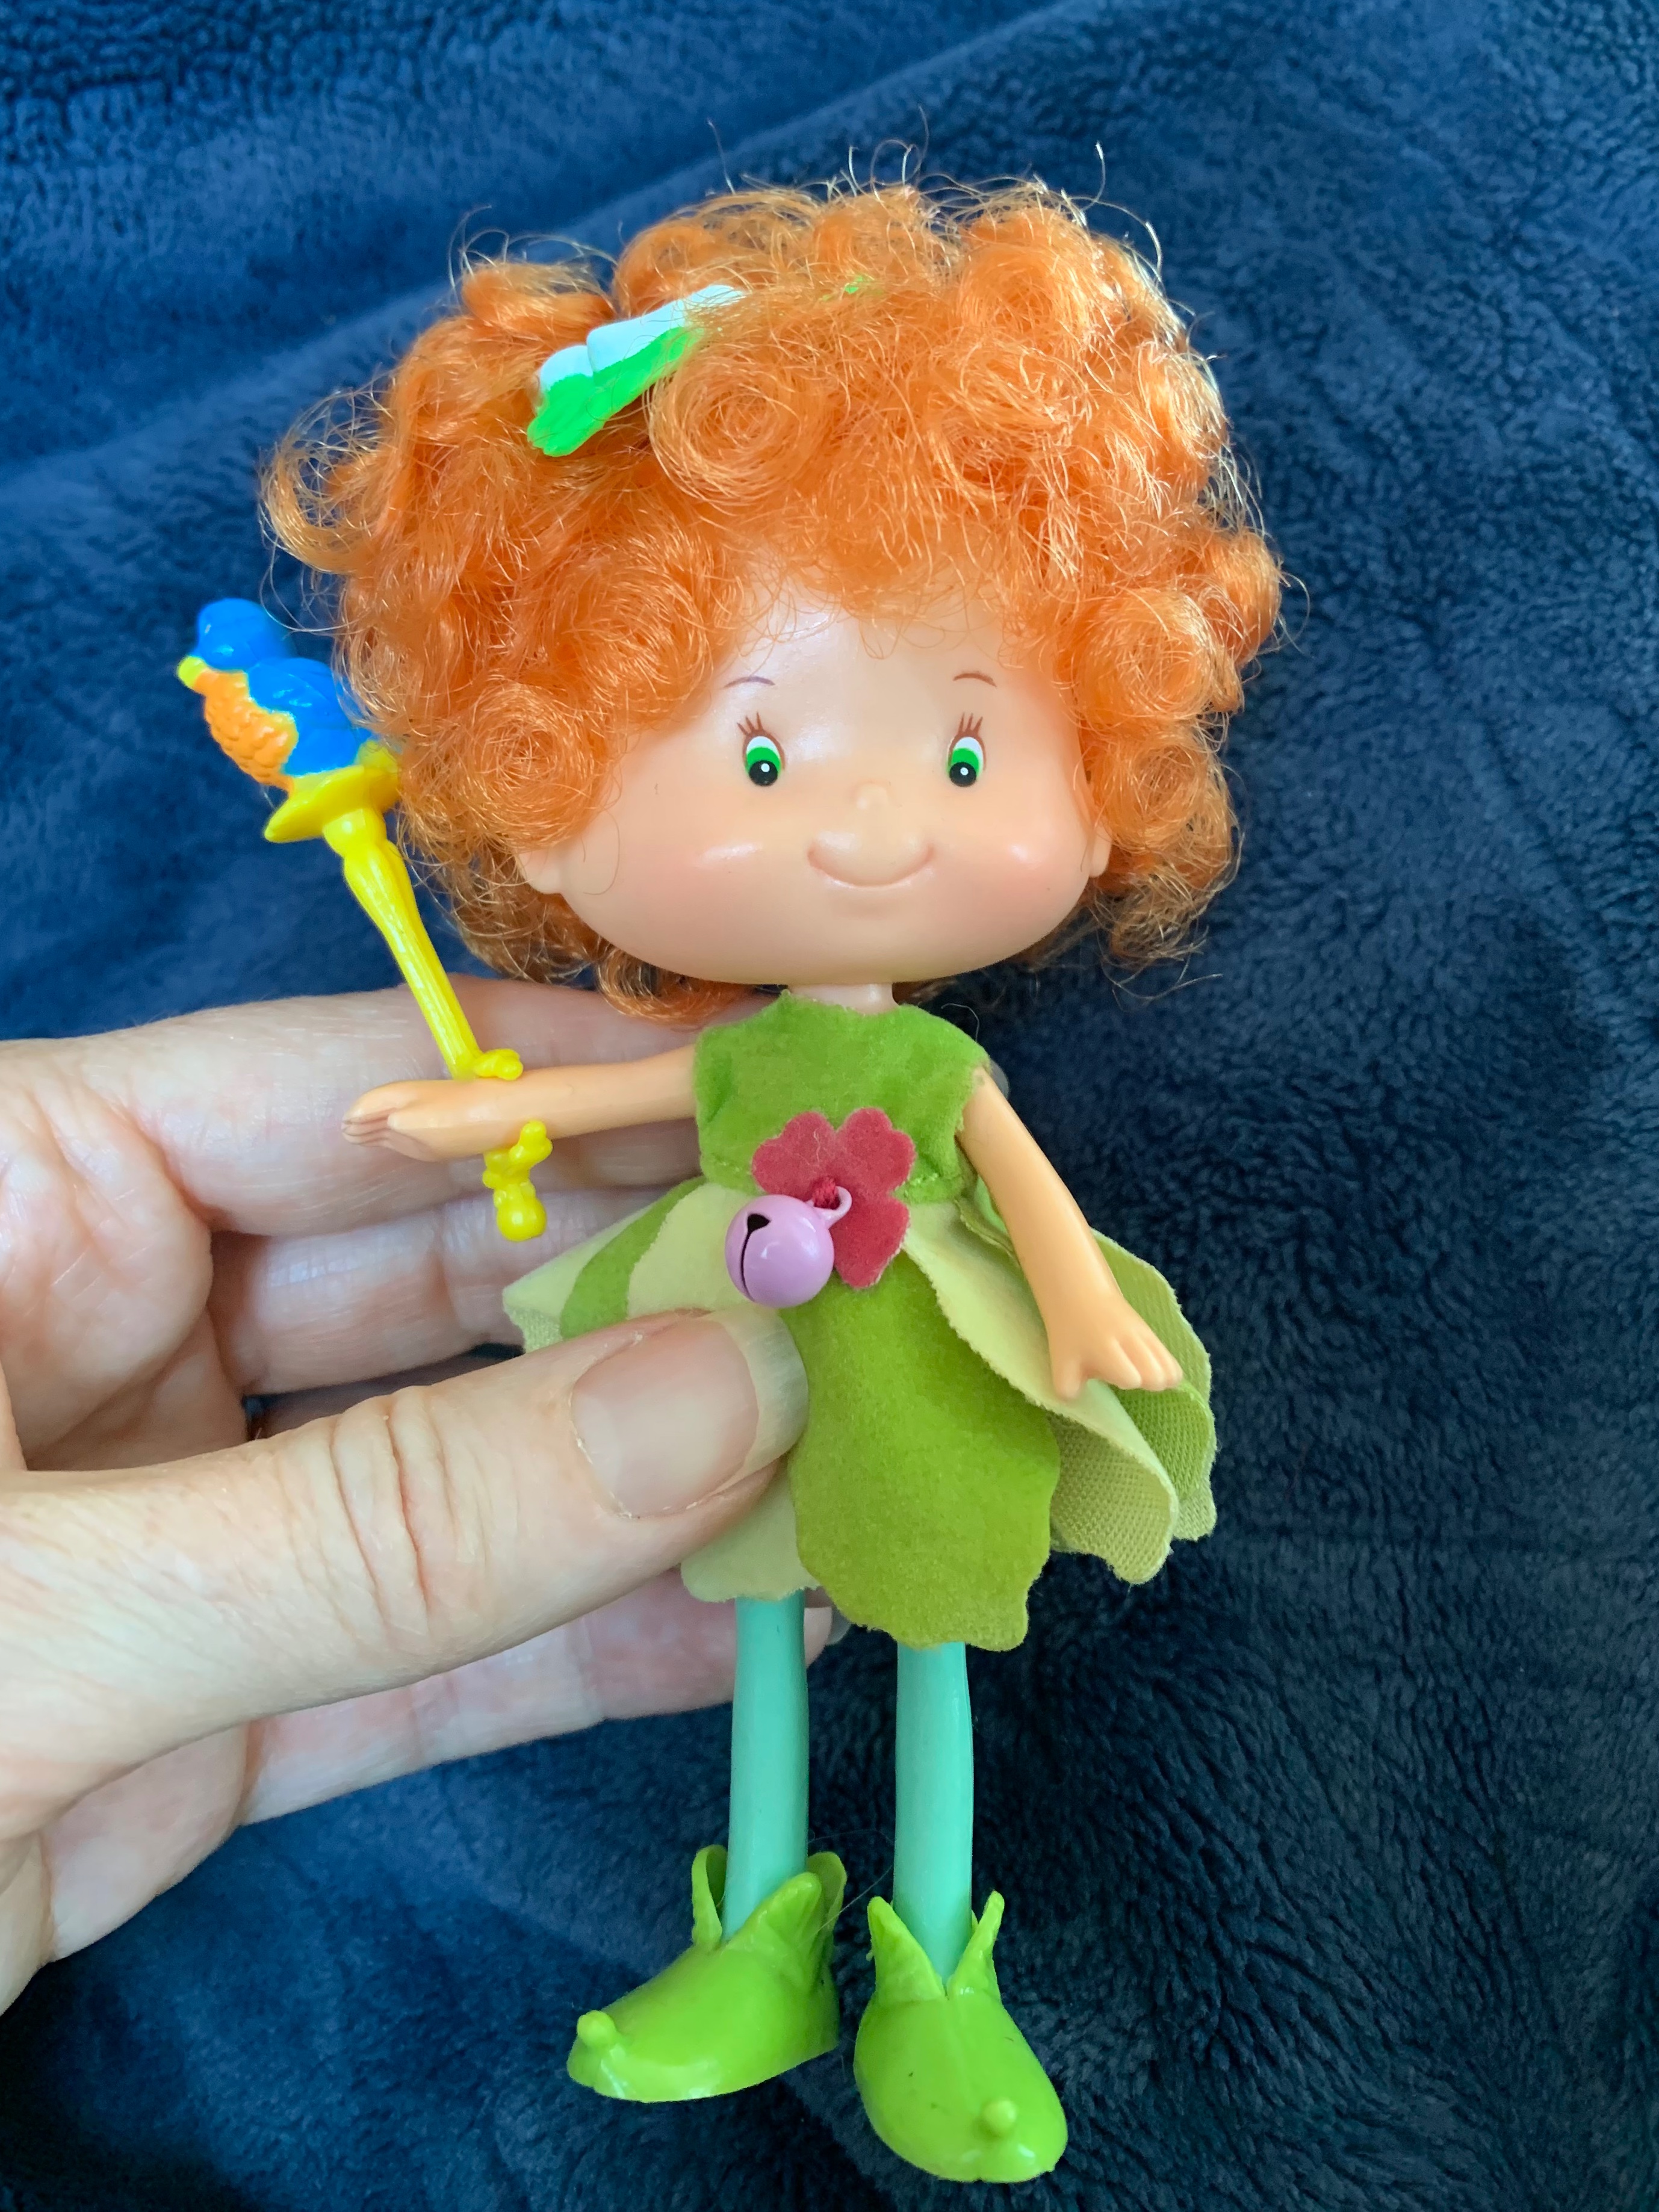 Can someone help me figure out why my redheaded doll is still